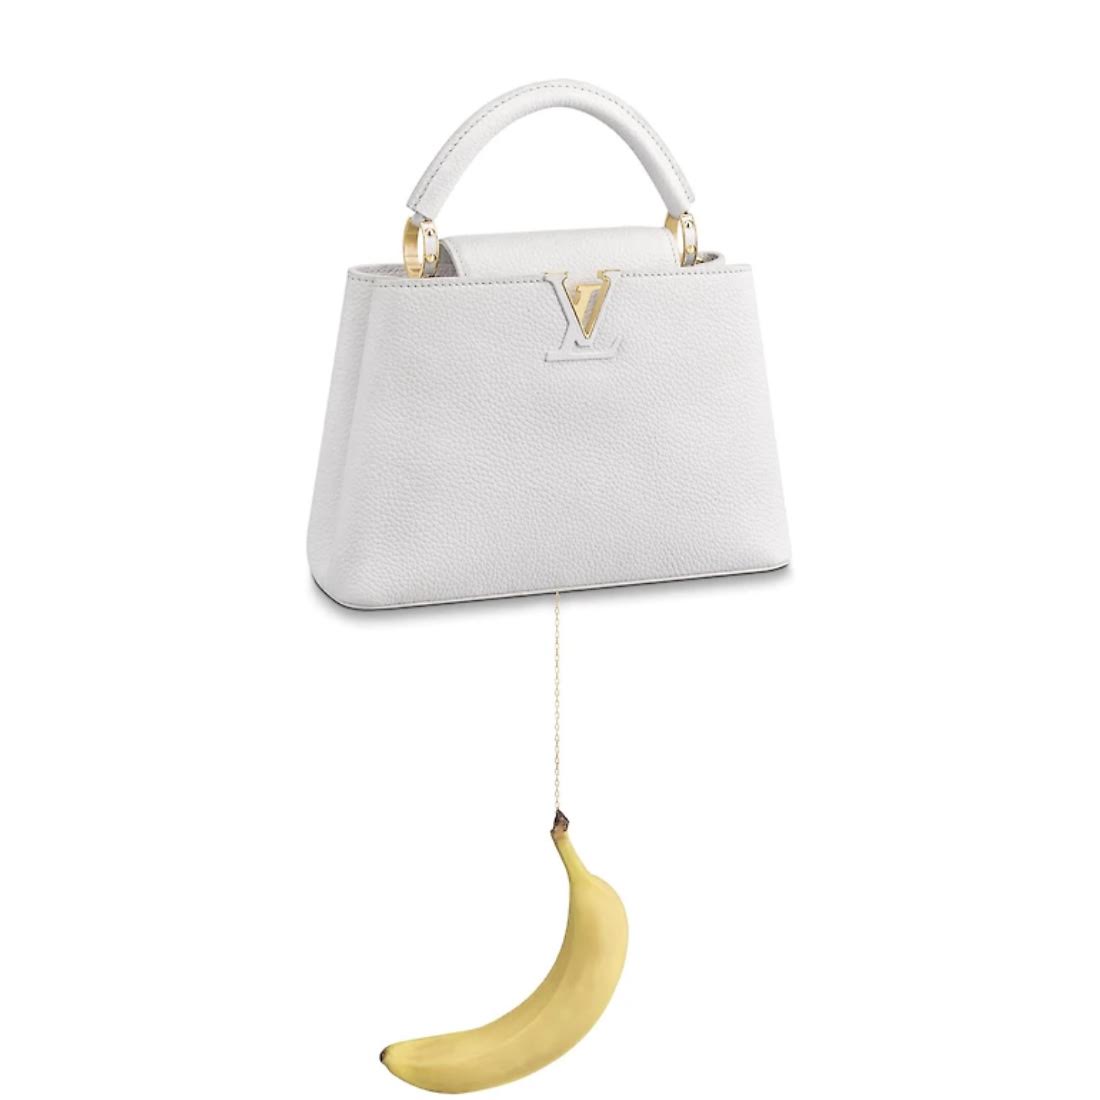 You Can Hang the Produce Aisle From Urs Fischer's Louis Vuitton Bag